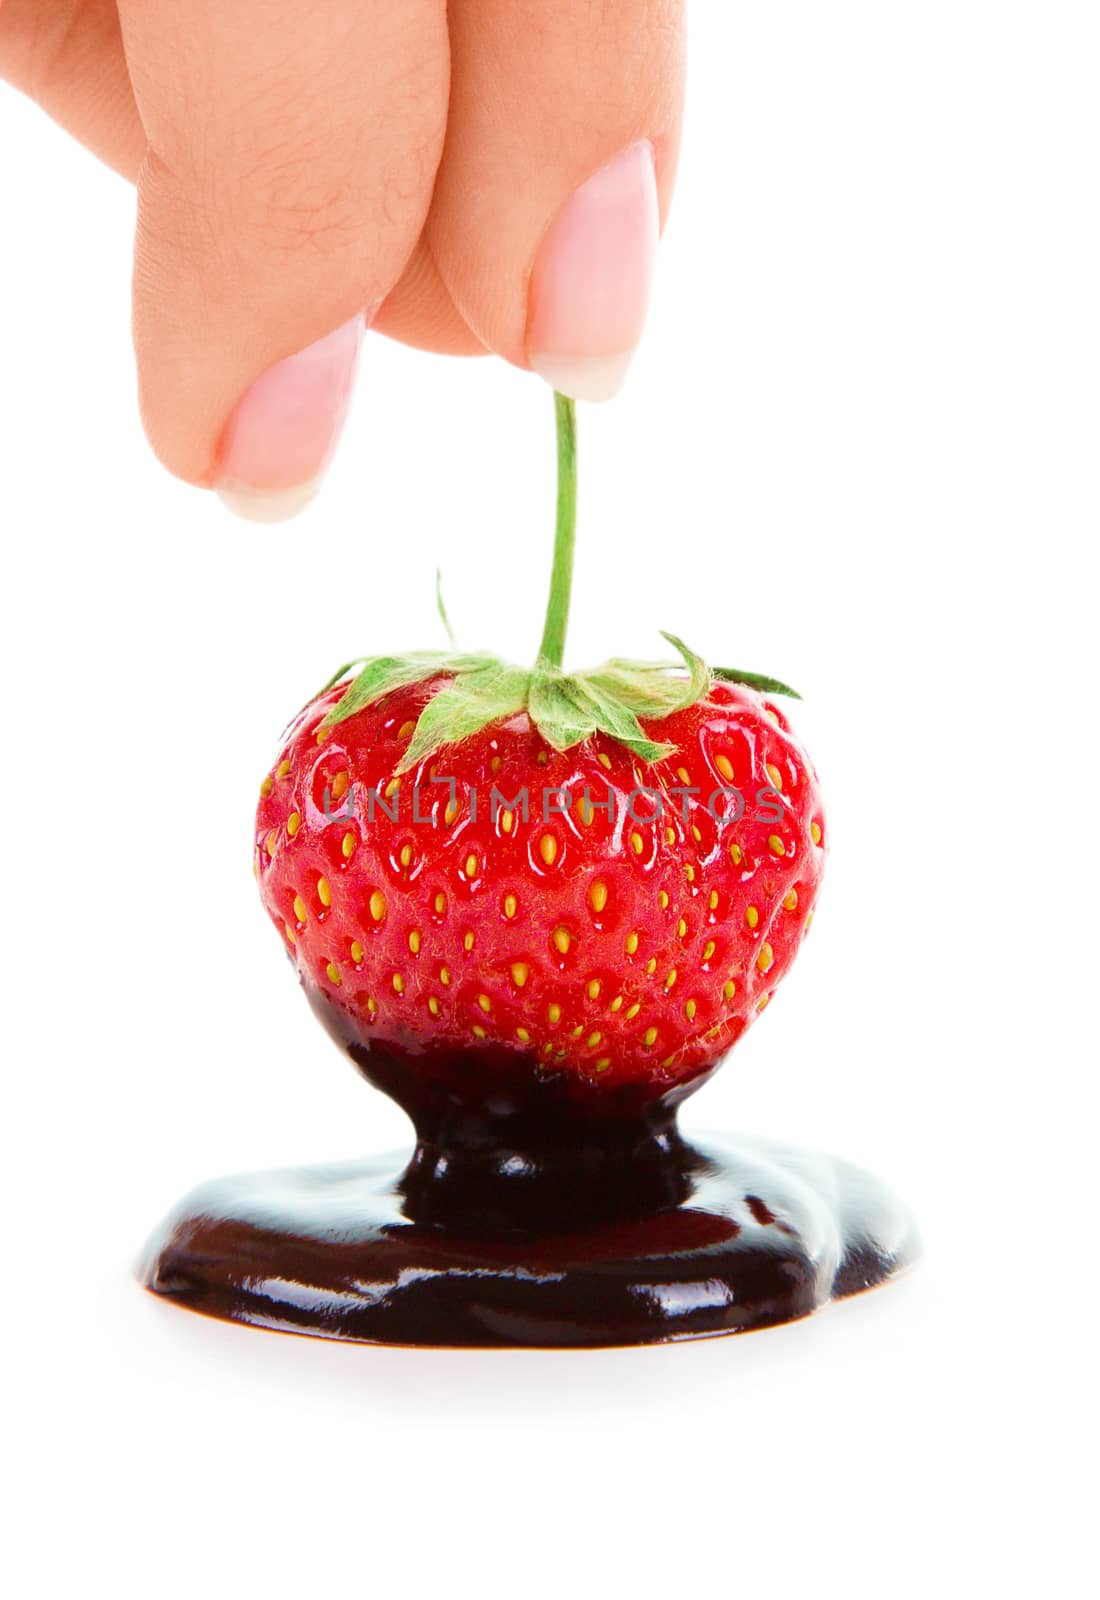 Woman hand holding chocolate-dipped strawberry by id7100